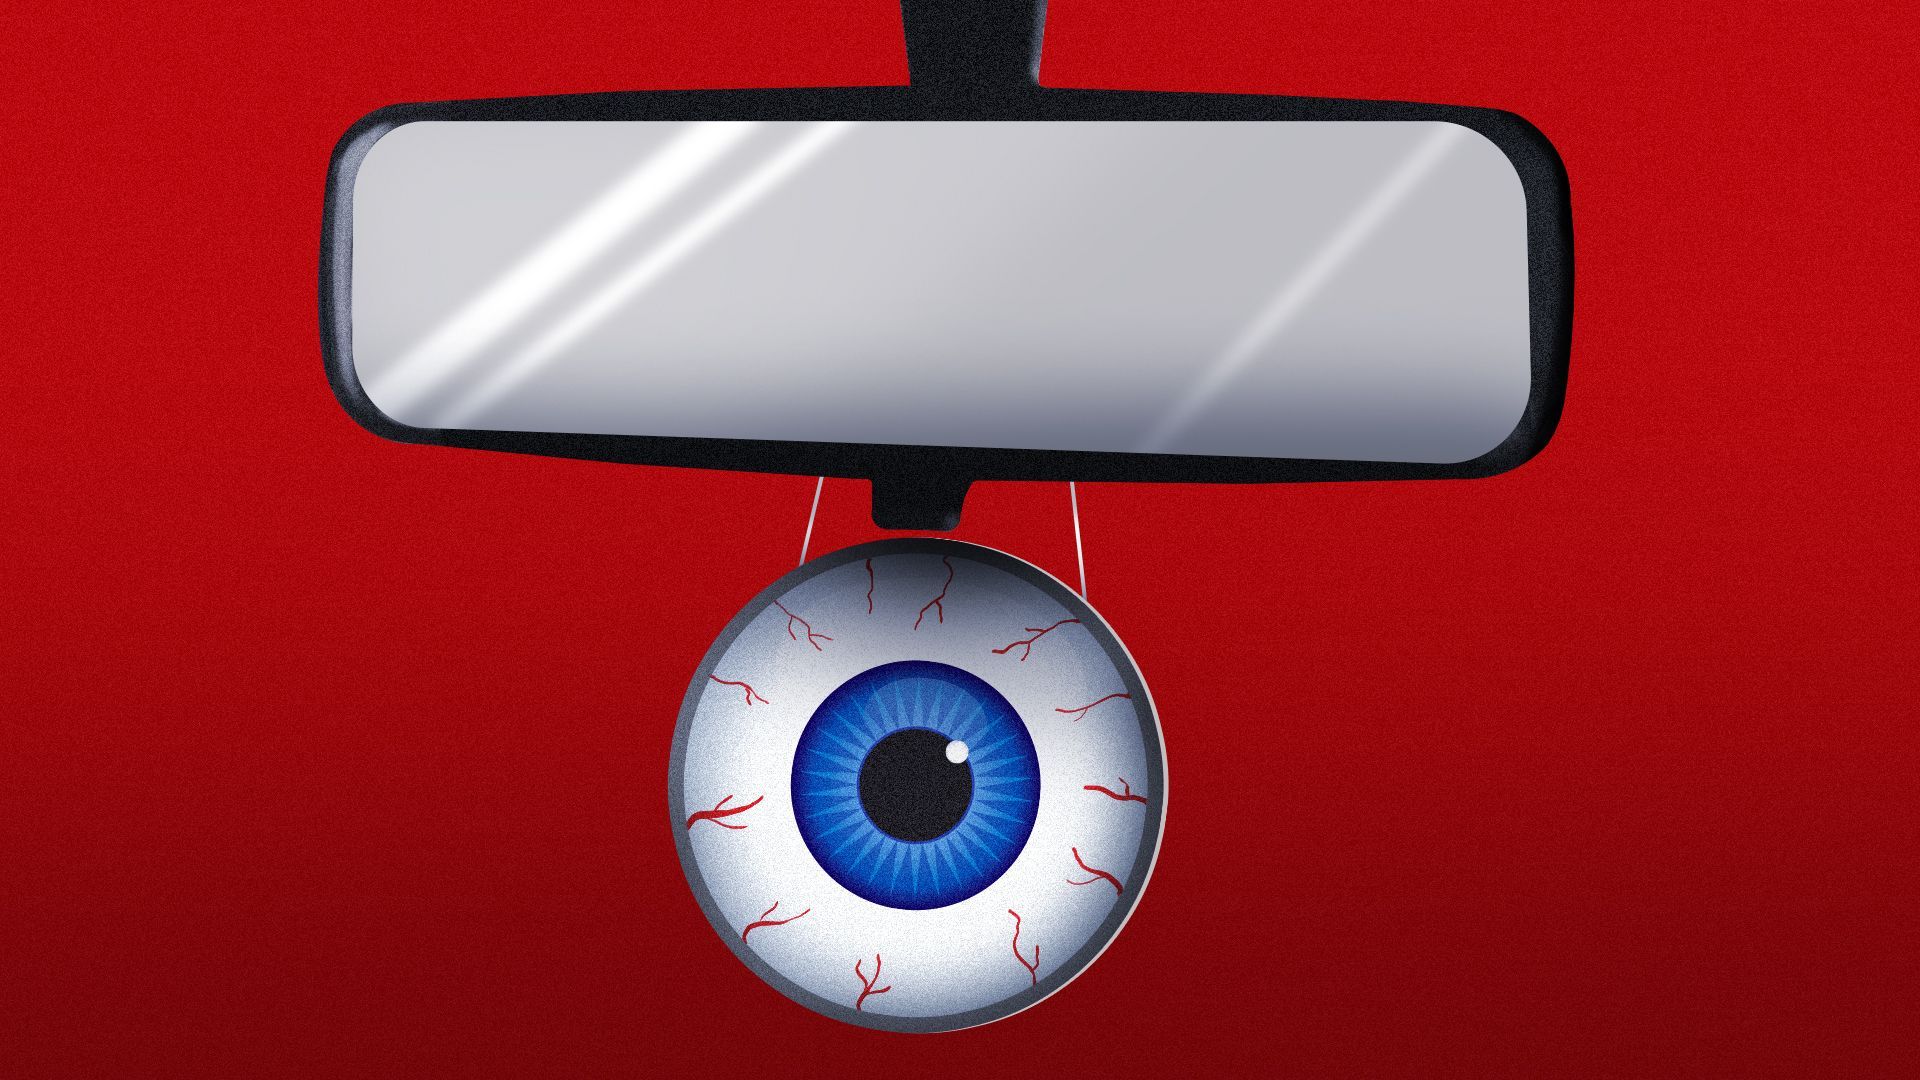 Illustration of an eyeball hanging as an air freshener from a car rearview mirror.